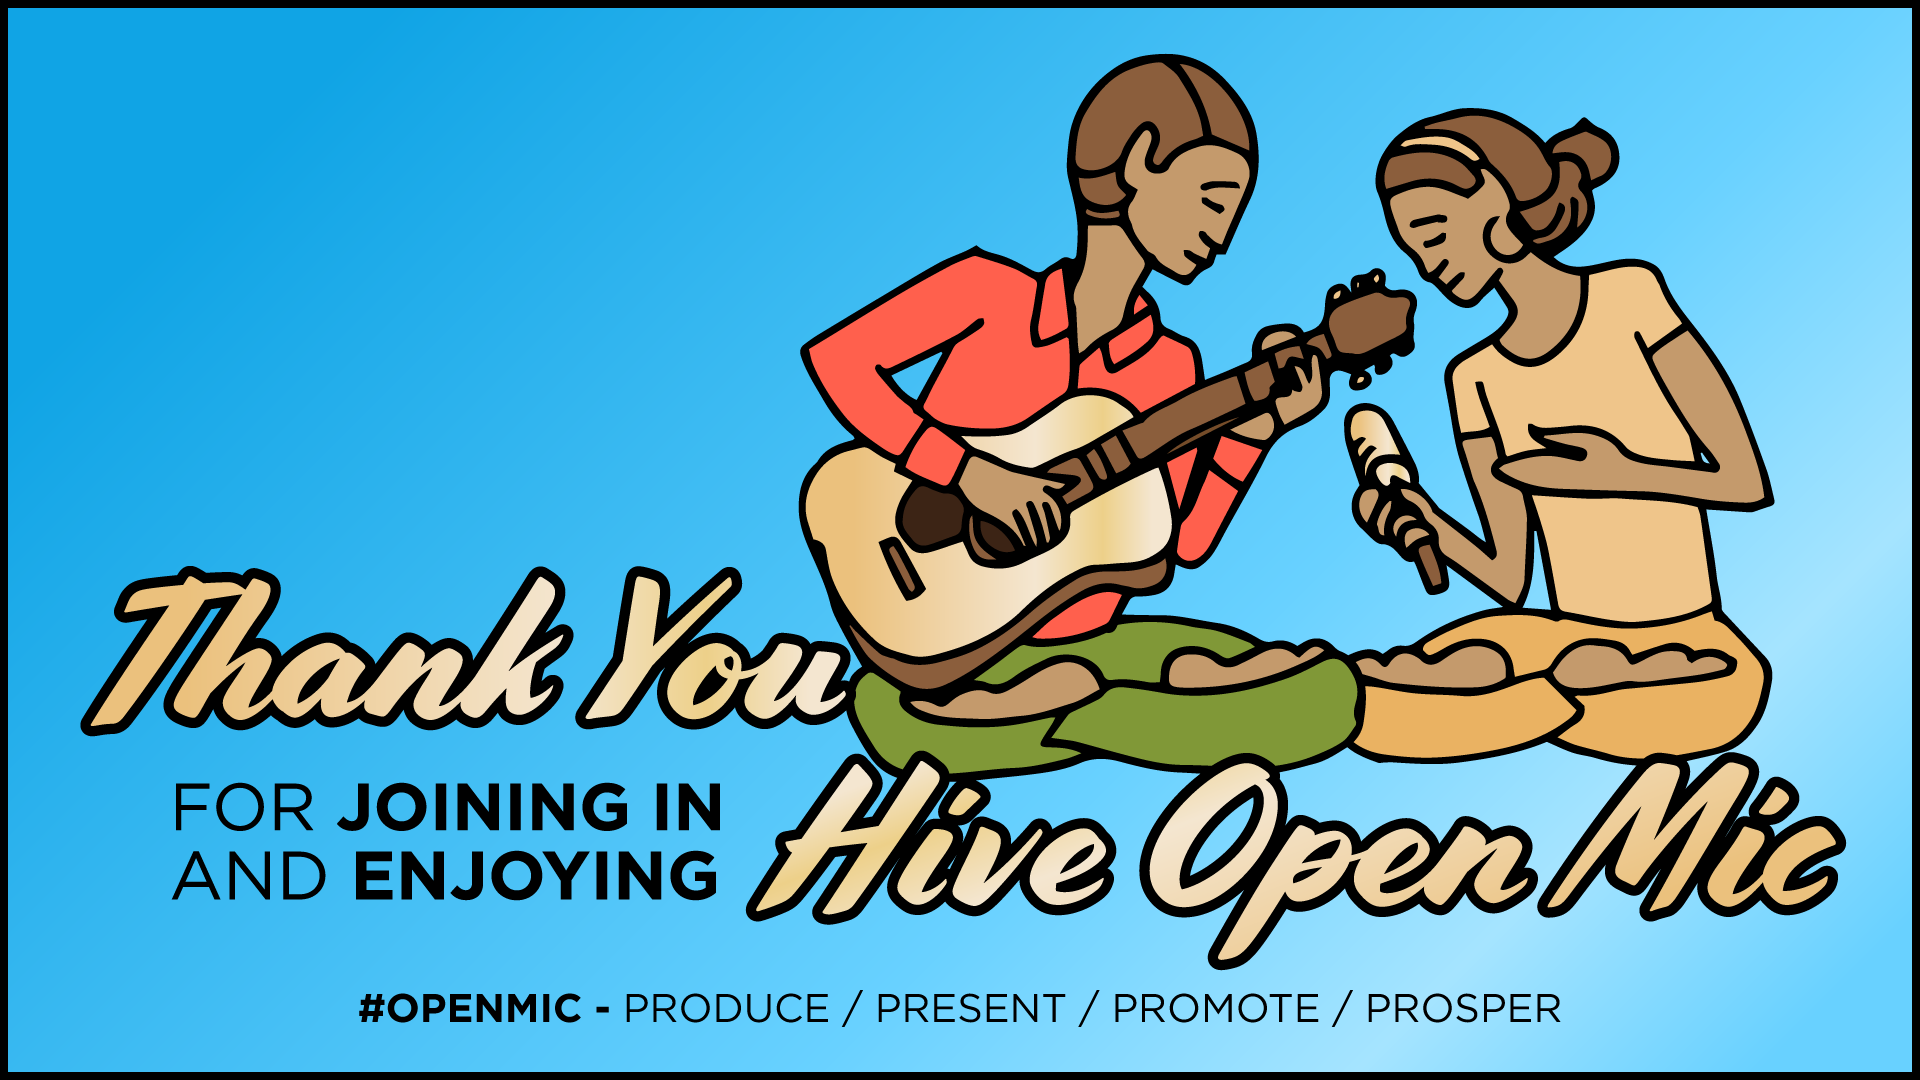 Thank you for joining in and enjoying Hive Open Mic